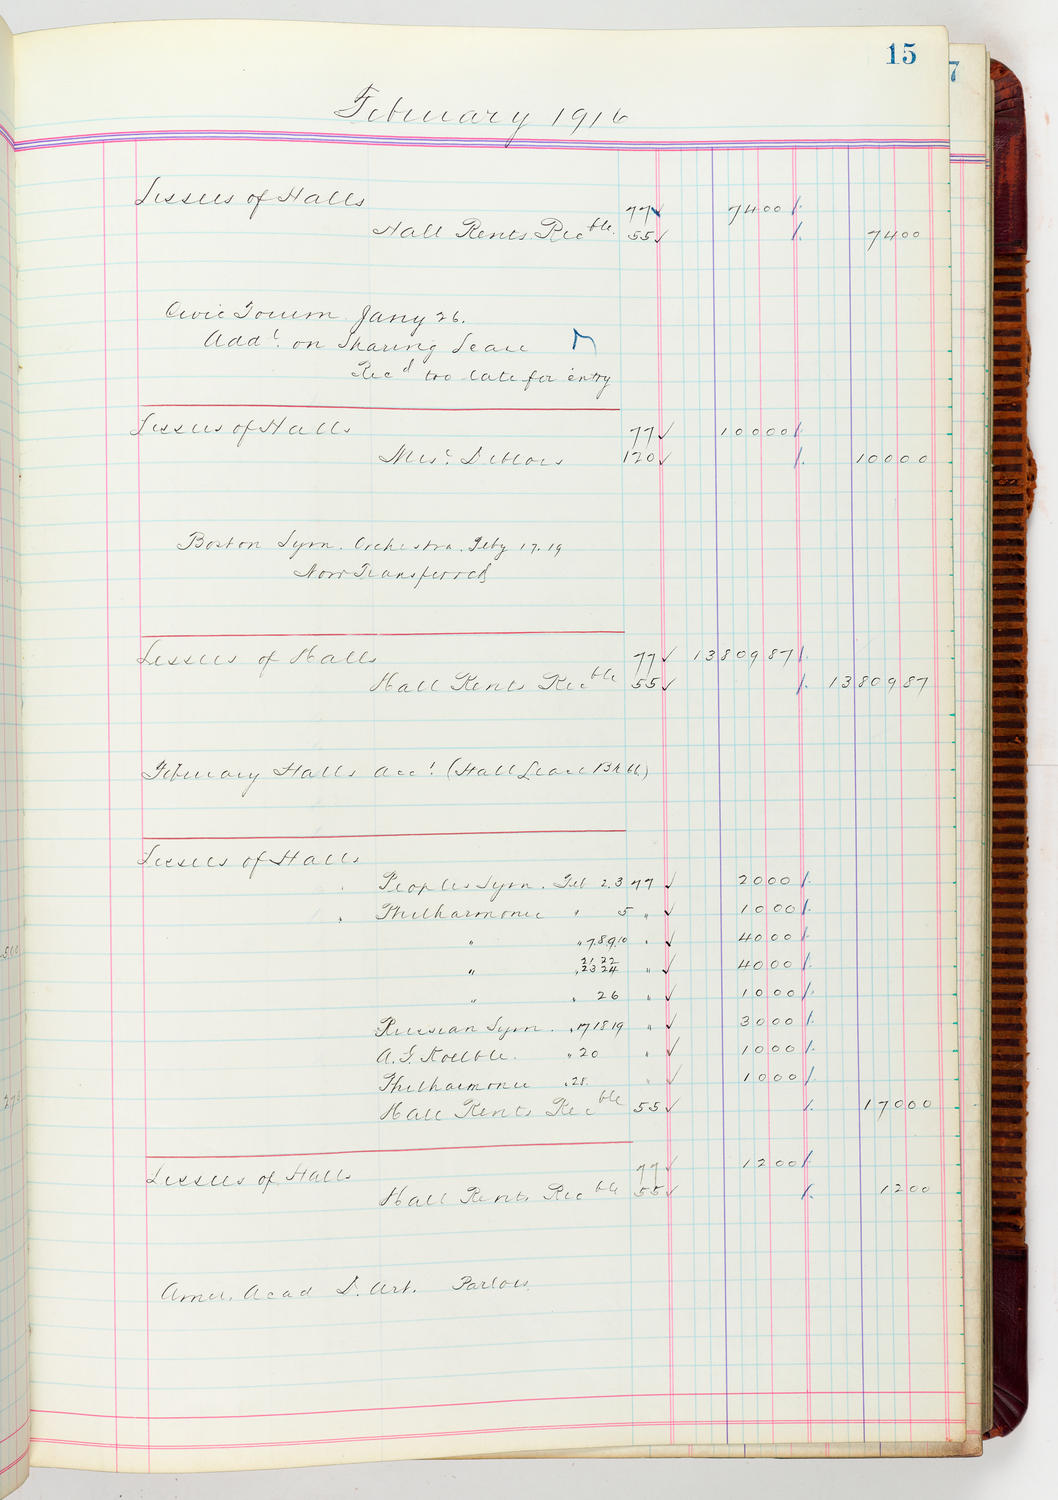 Music Hall Accounting Ledger, volume 5, page 15